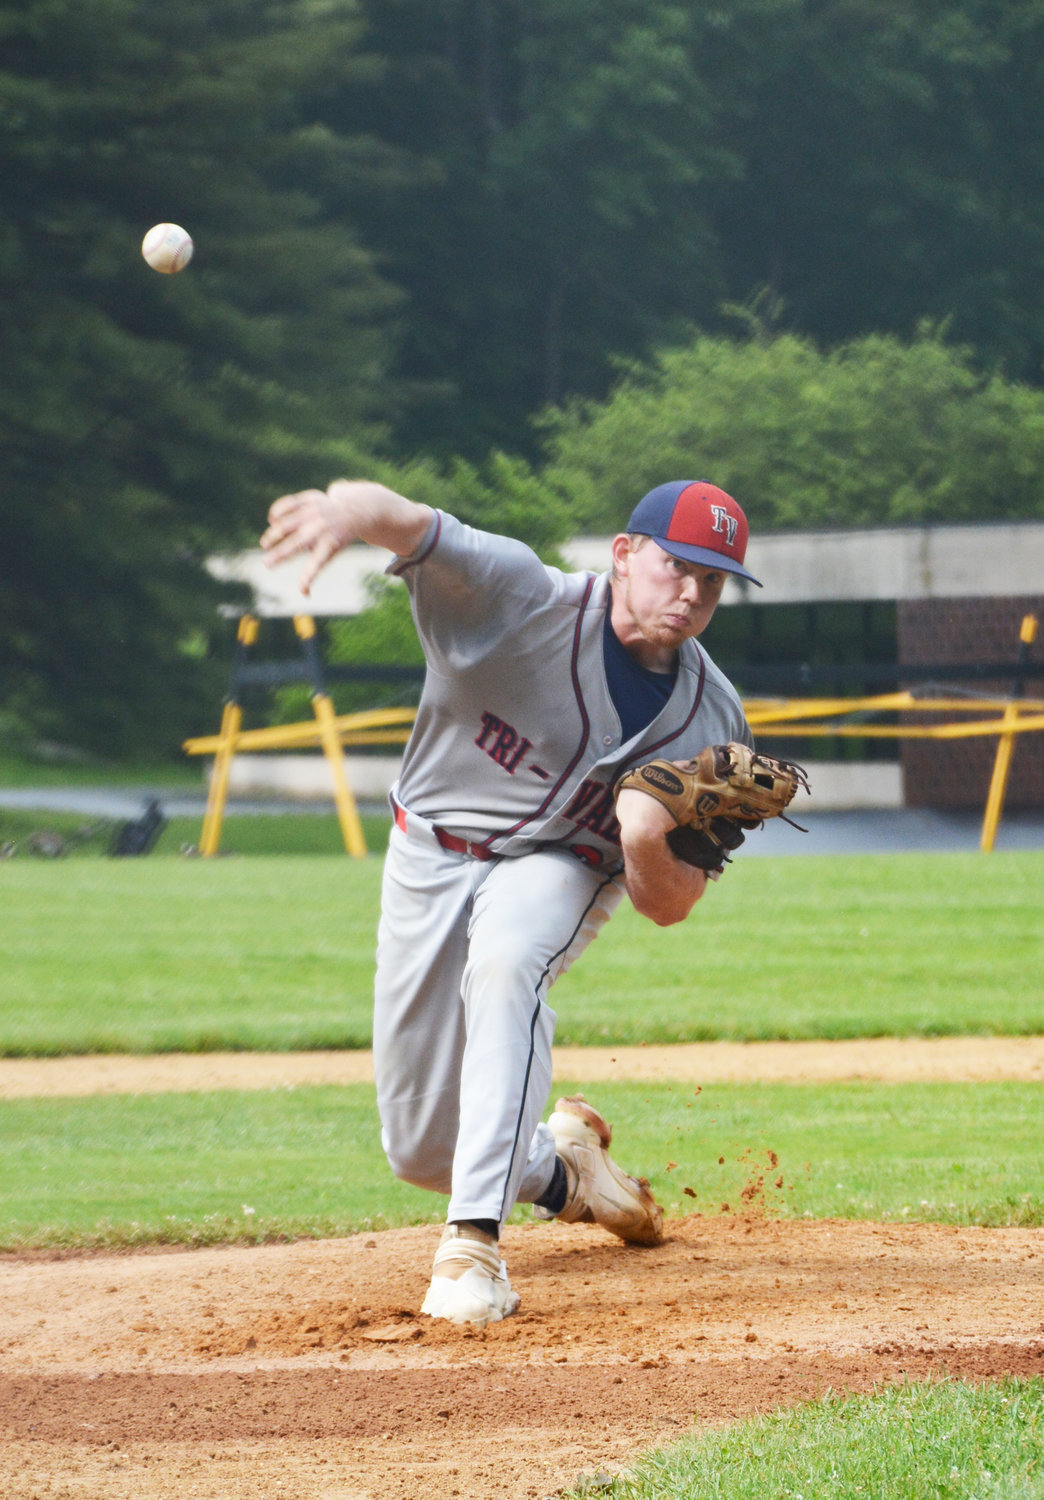 Jacob Yager struck out 14 batters in Tuesday's playoff win.